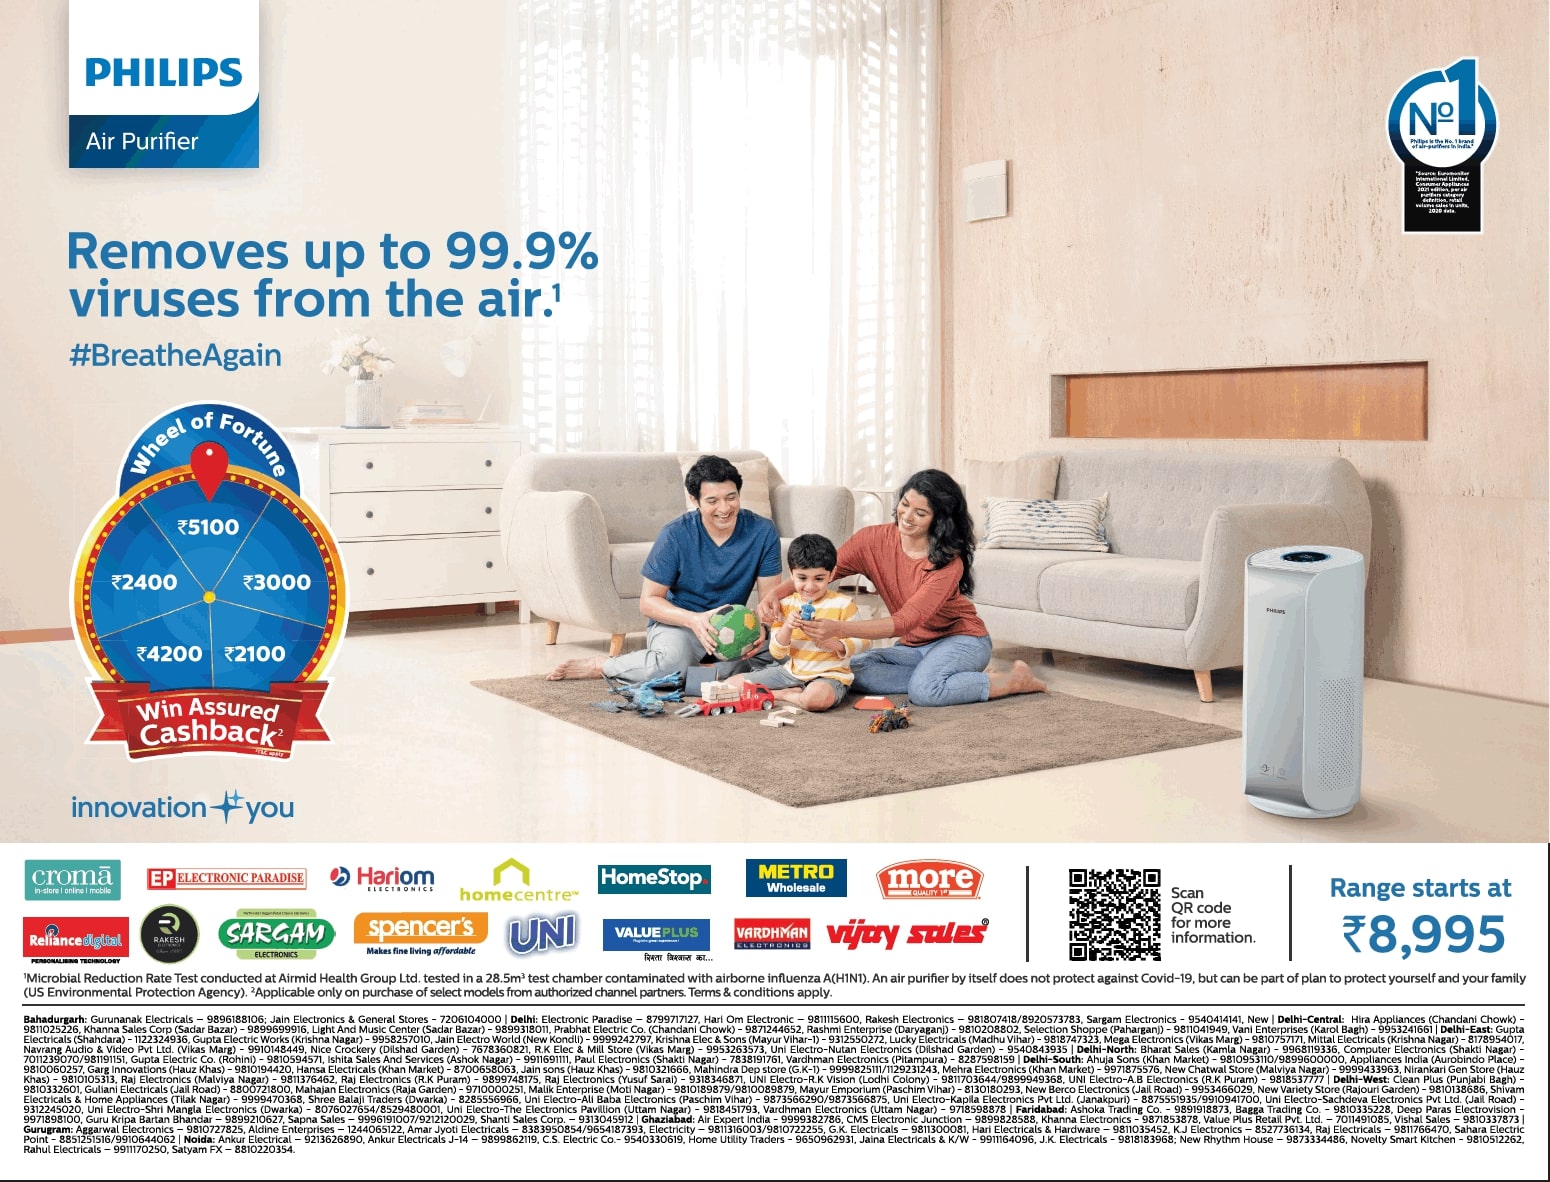 philips-air-purifier-removes-up-to-99-9%-viruses-from-air-ad-delhi-times-20-03-2021